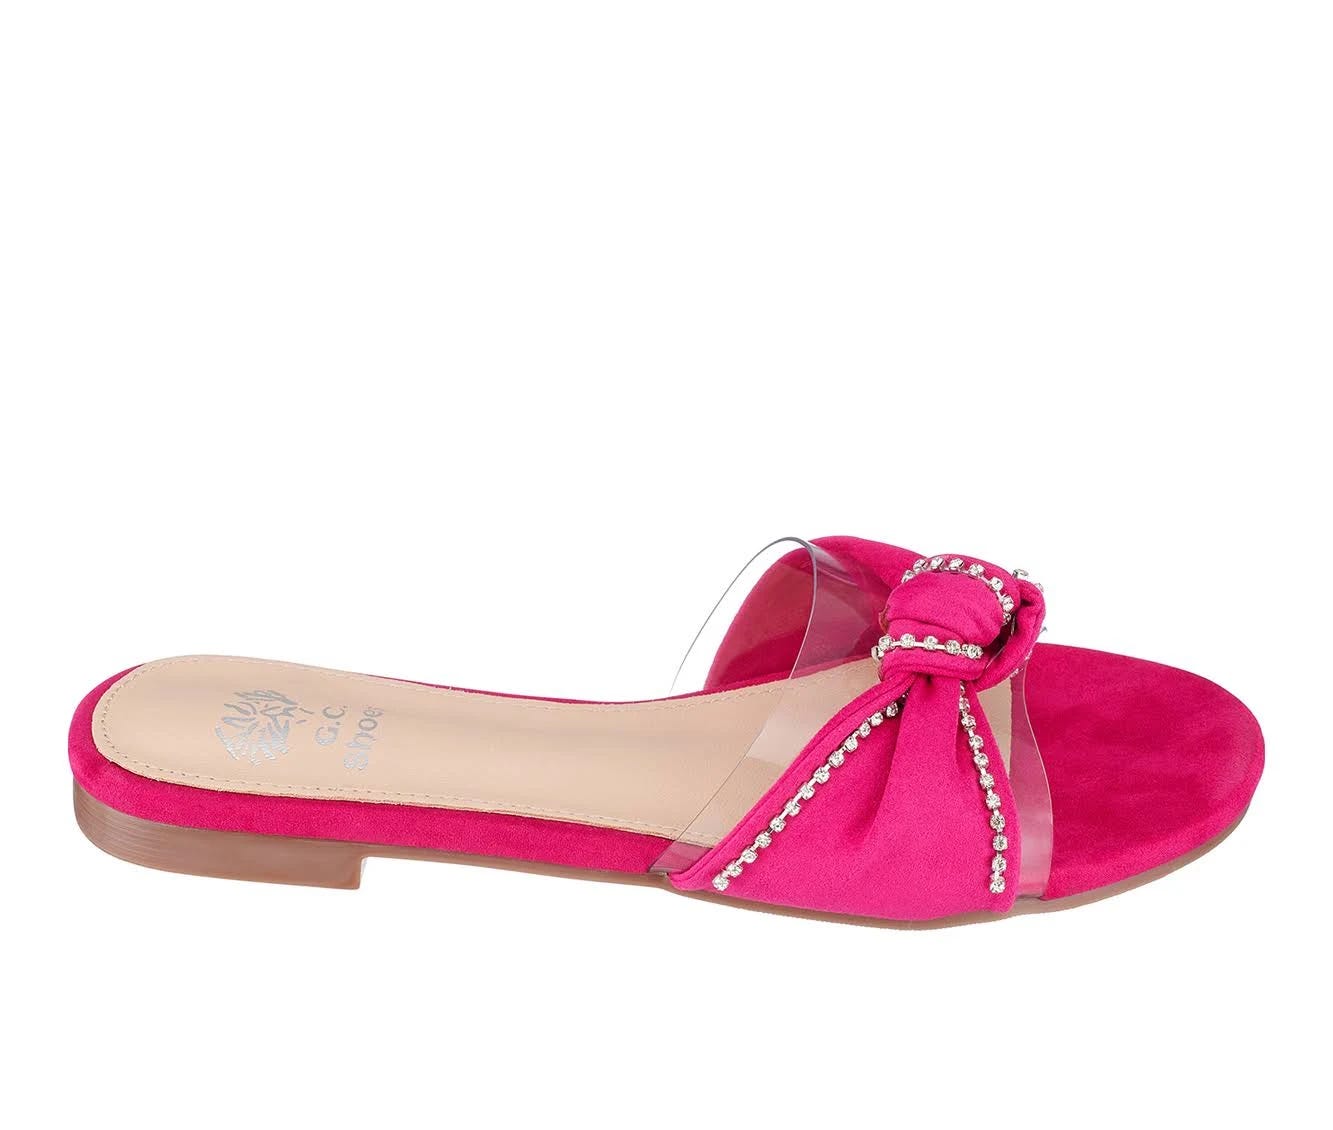 Fuchsia Flat Sandals by GC Shoes - Rhinestone Embellished Heels, Luxurious Suede Upper Strap, Medium Width, Cushioned Footbed | Image